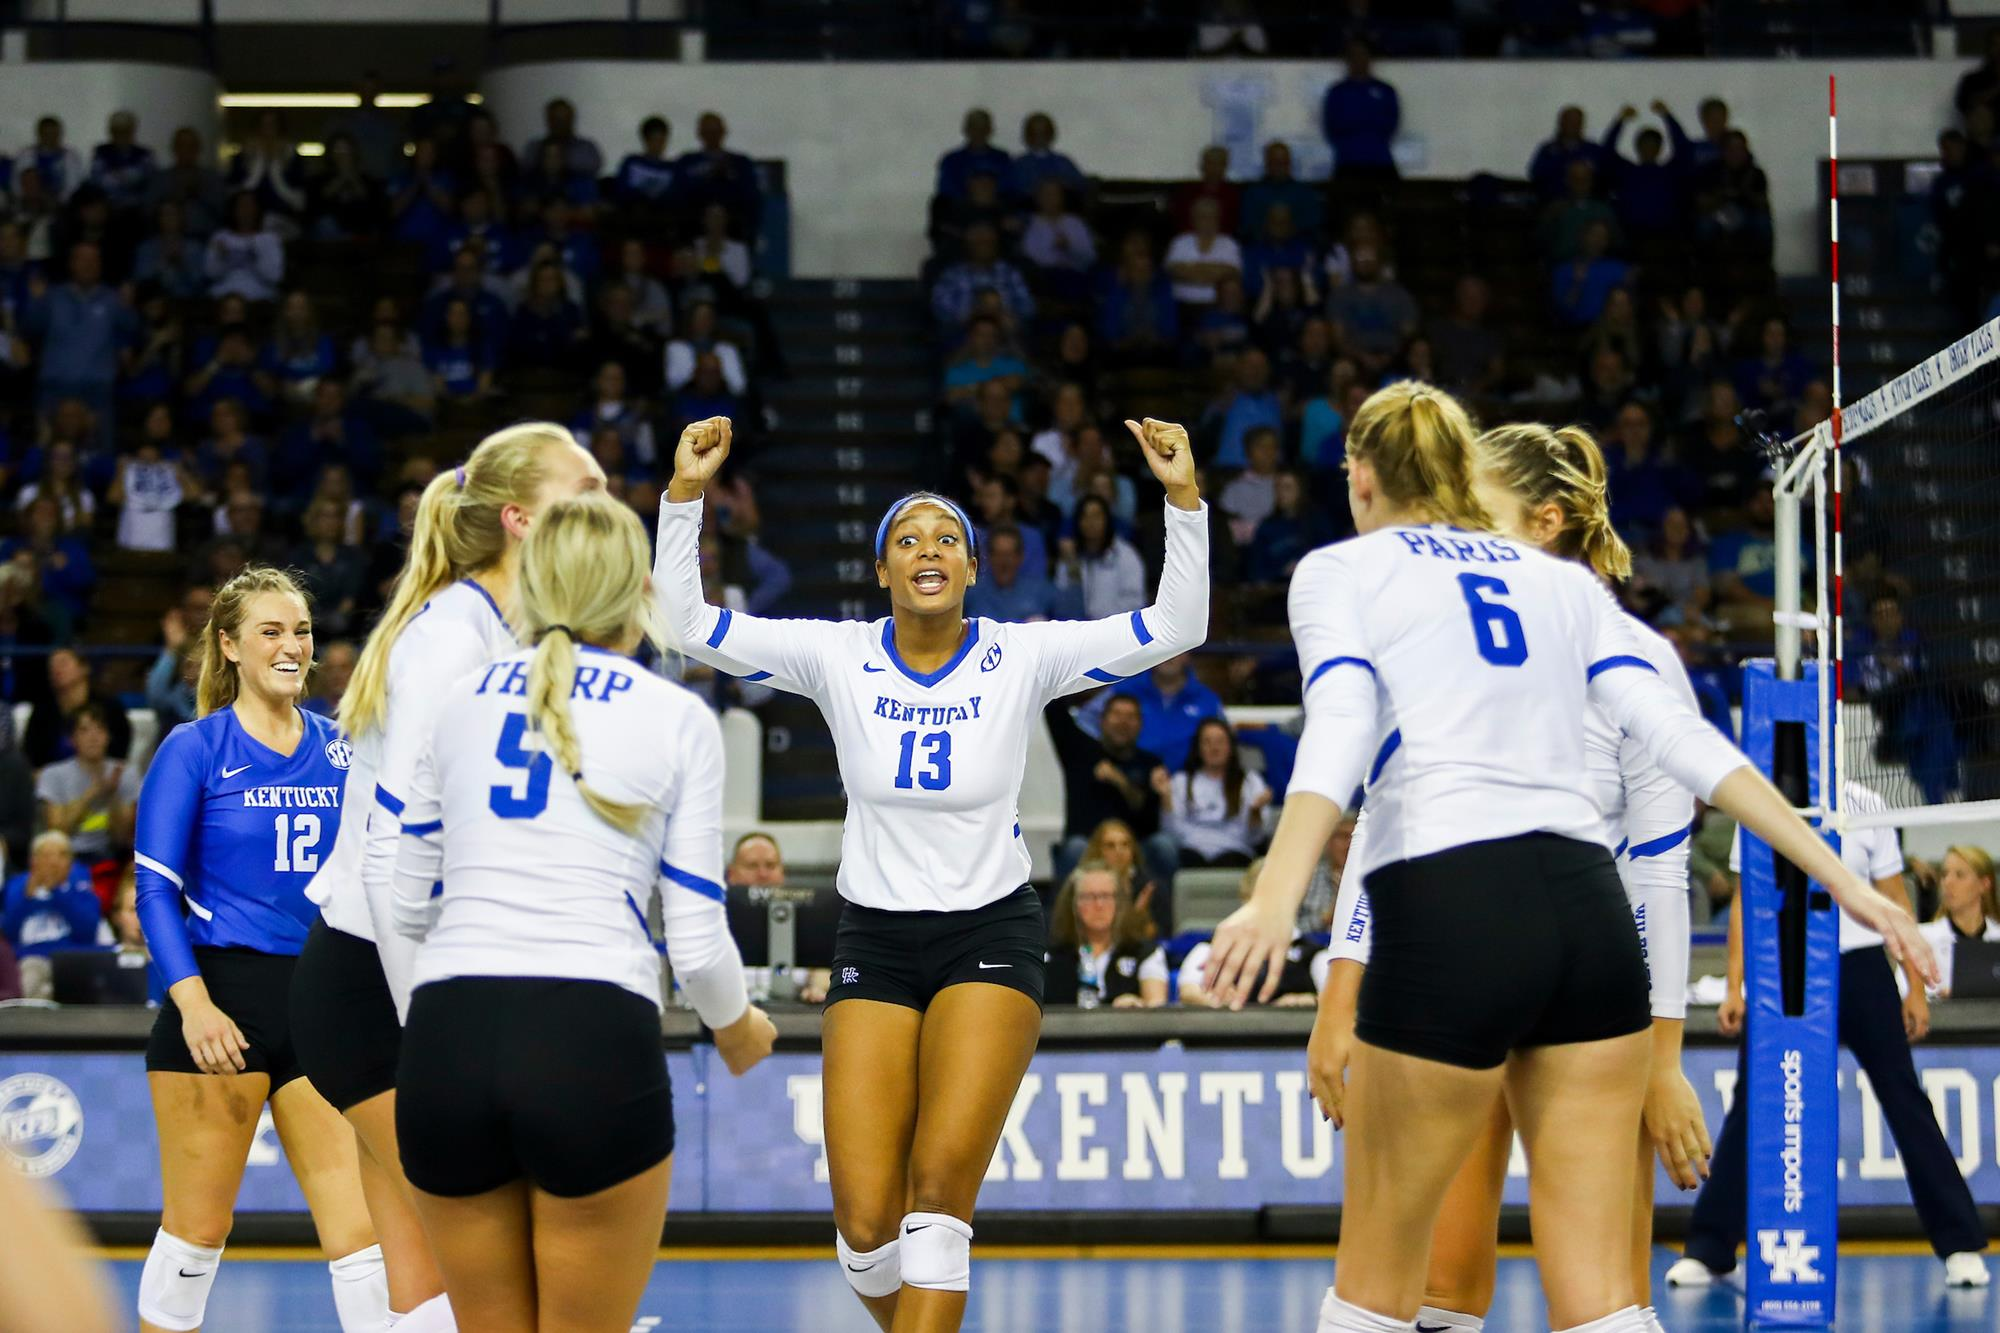 Leah Edmond, Madison Lilley and Gabby Curry Win SEC Awards